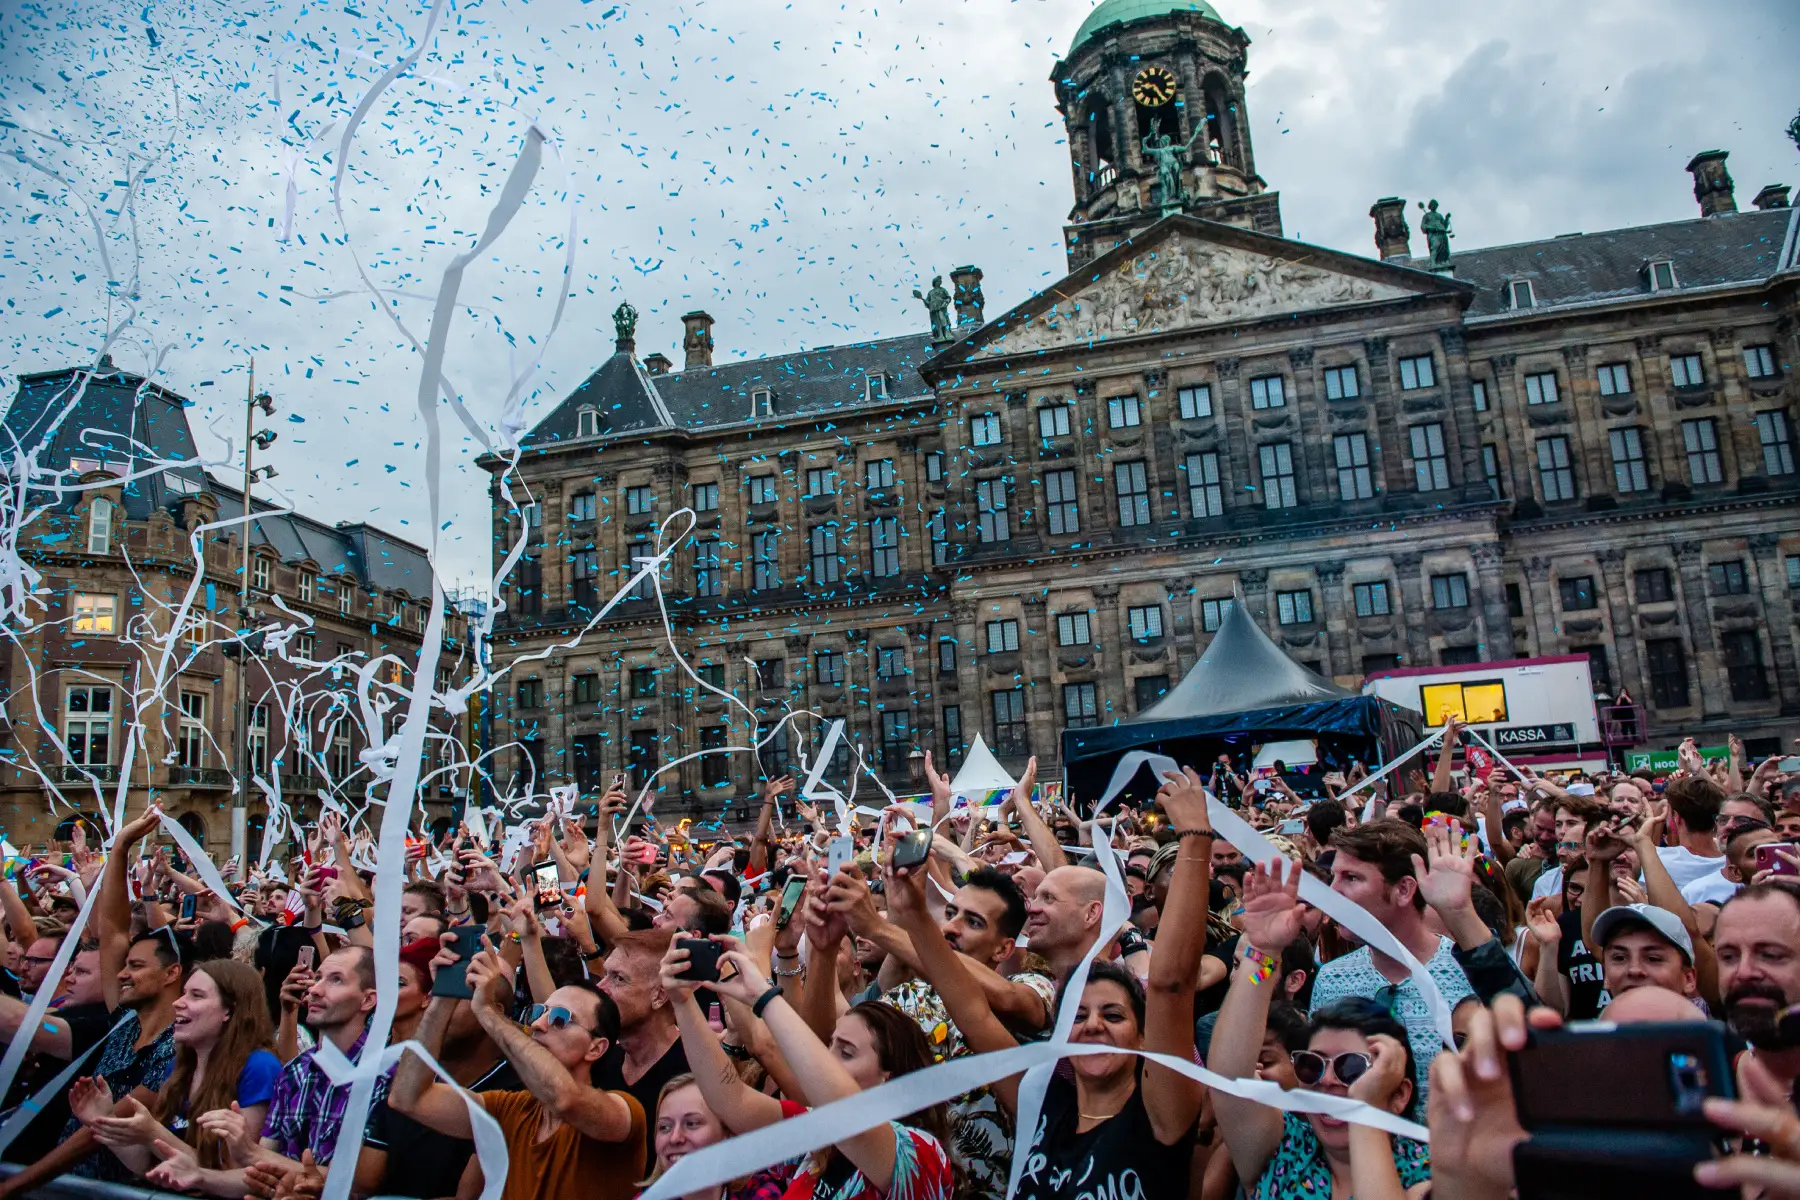 Streamers flying over crowds of people celebrating Pride Amsterdam's Closing Party